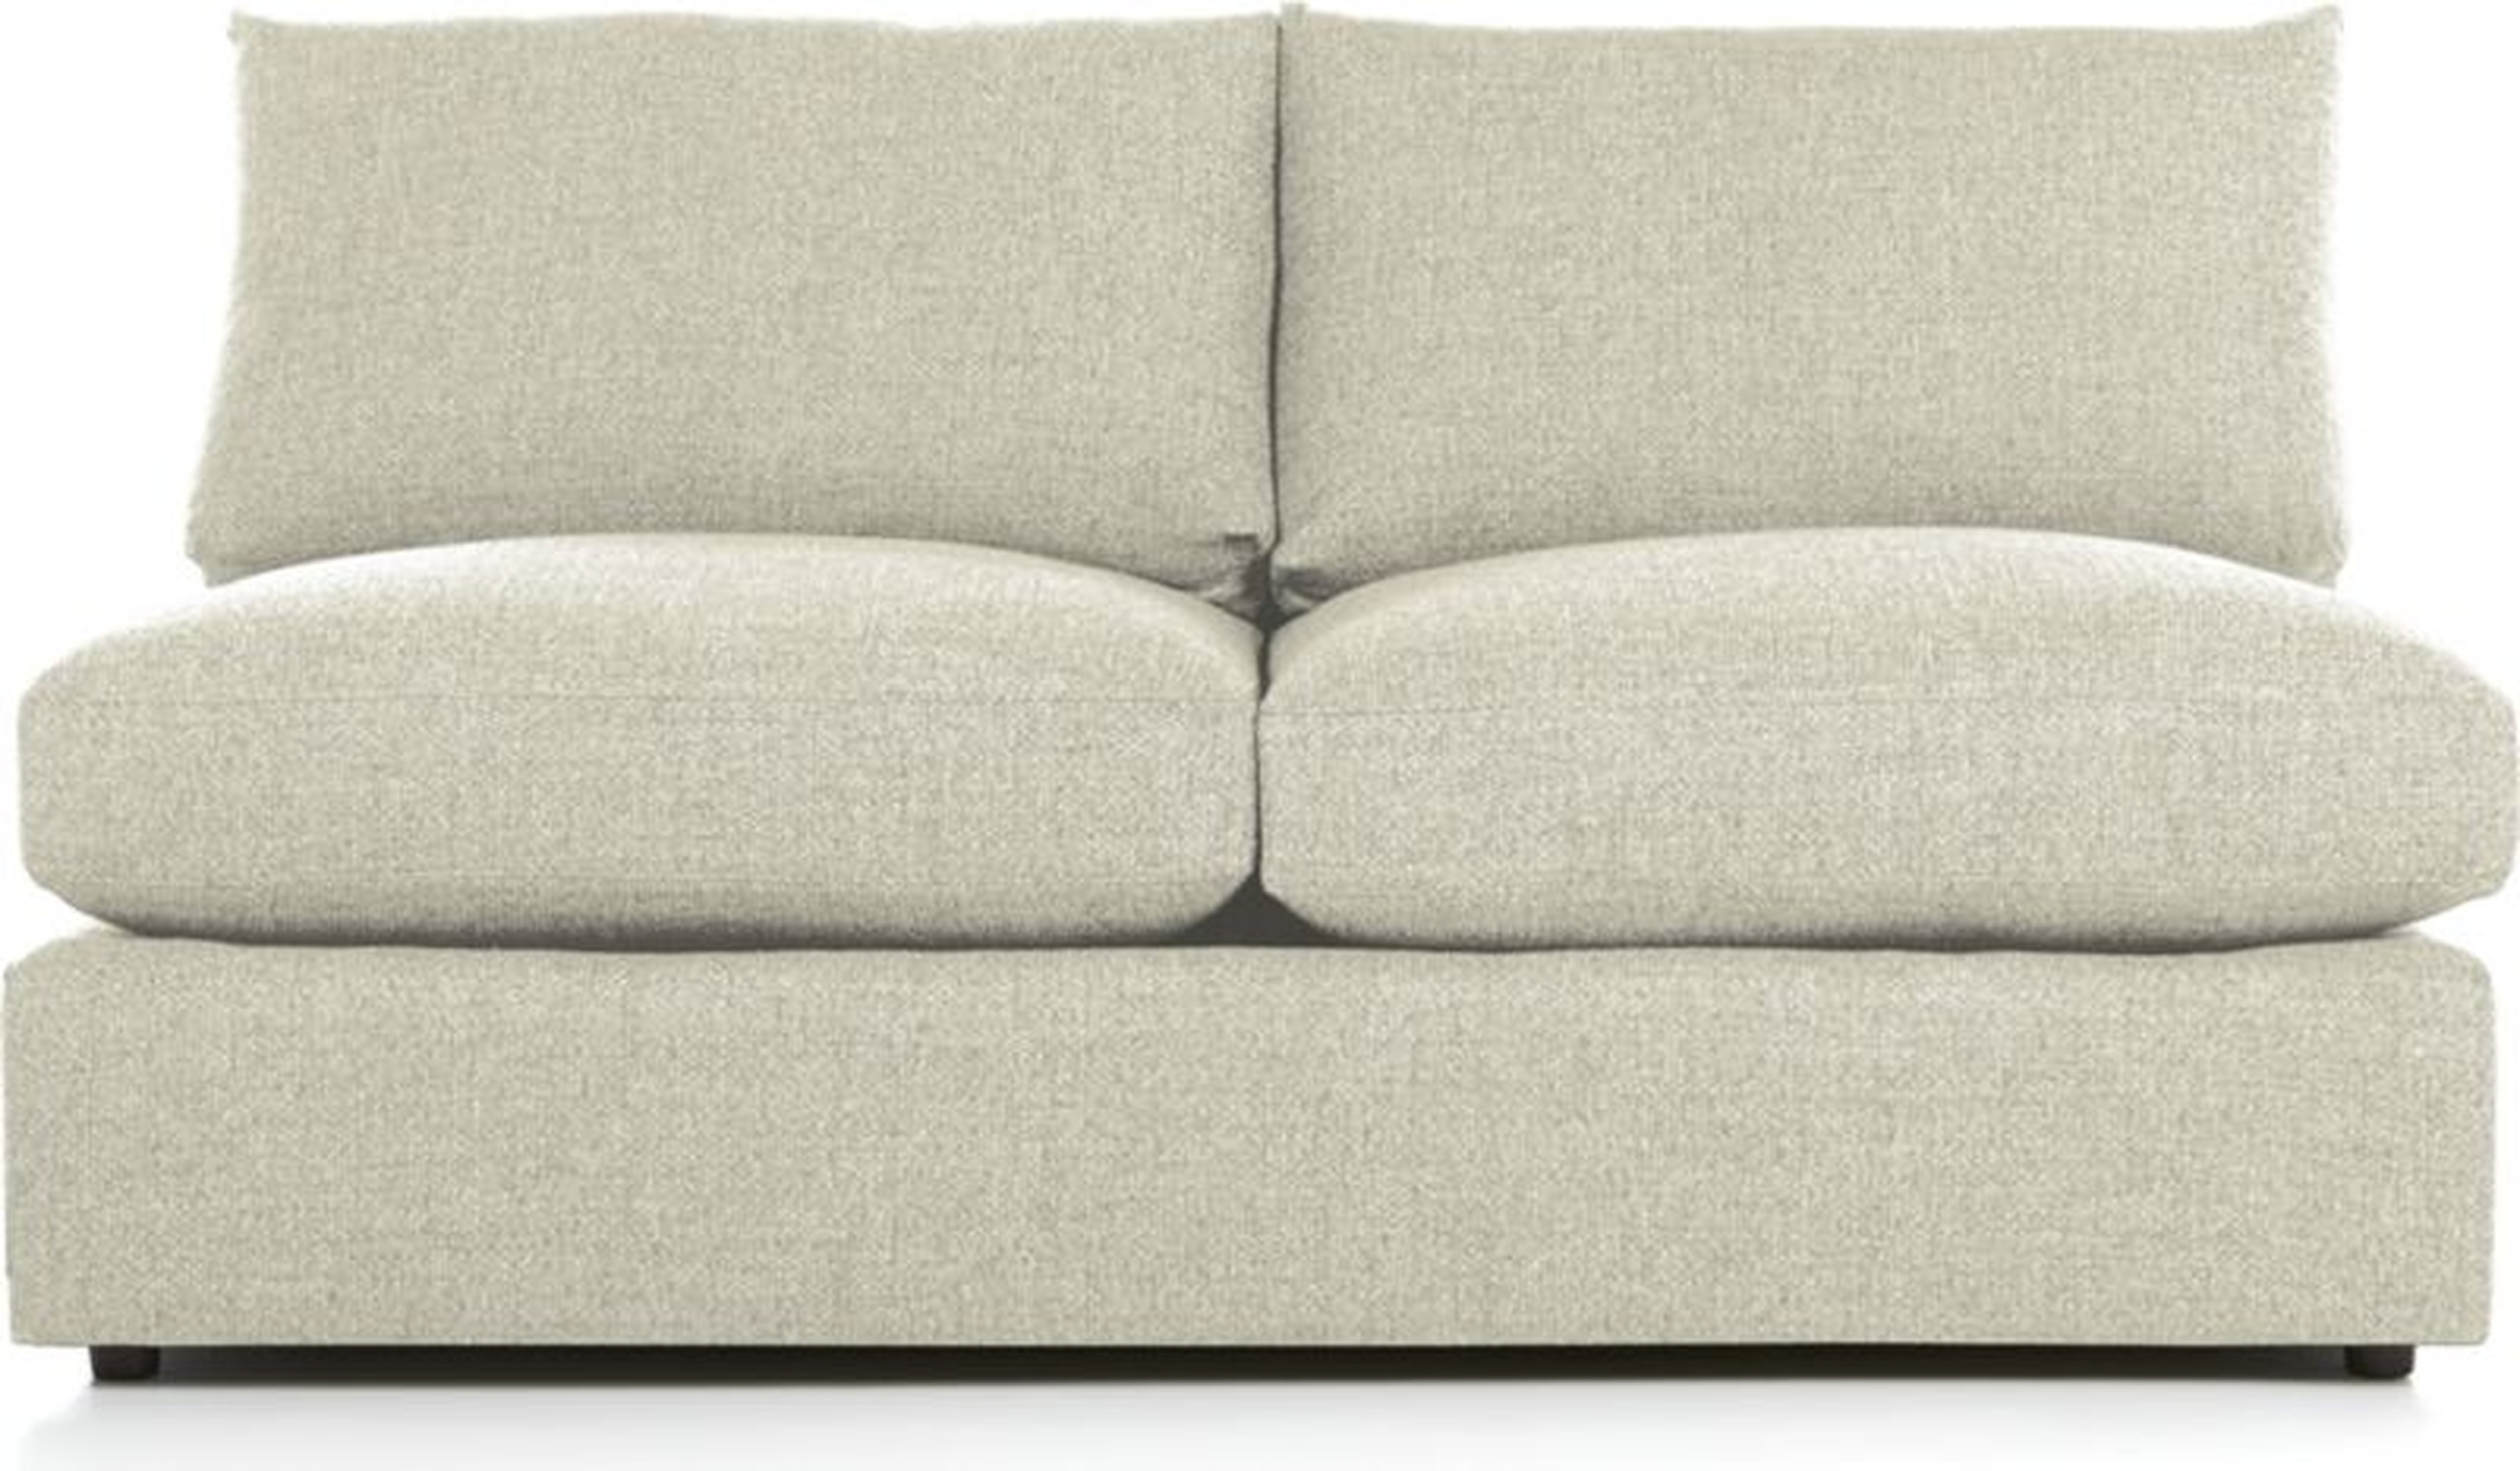 Lounge II Armless Loveseat - Cement - Crate and Barrel